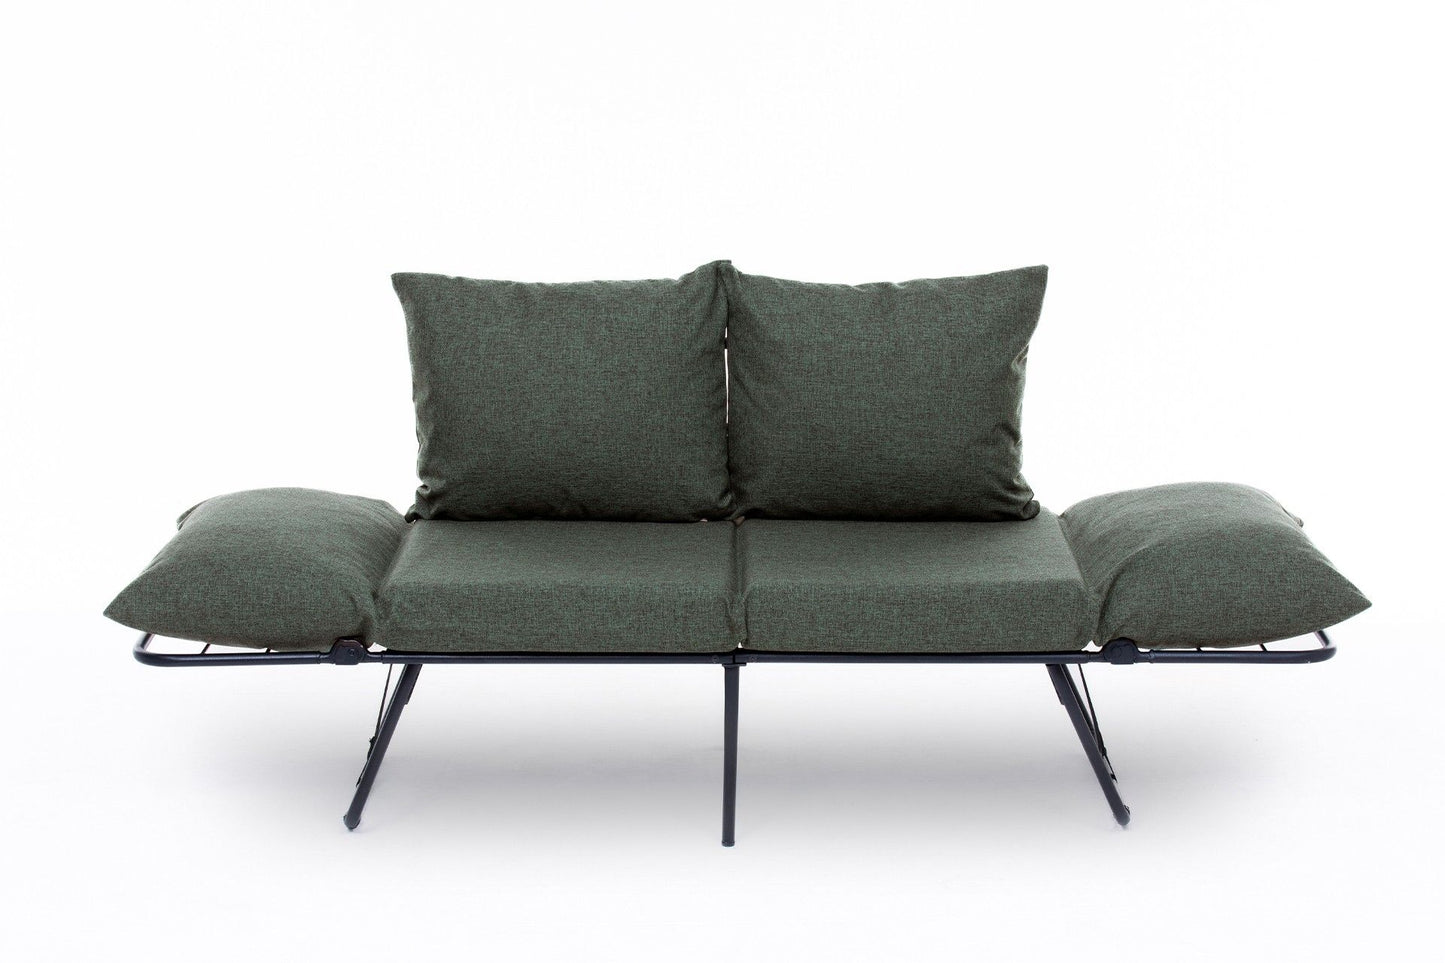 Viper 2-Seater - Green - 2-Seat Sofa-Bed